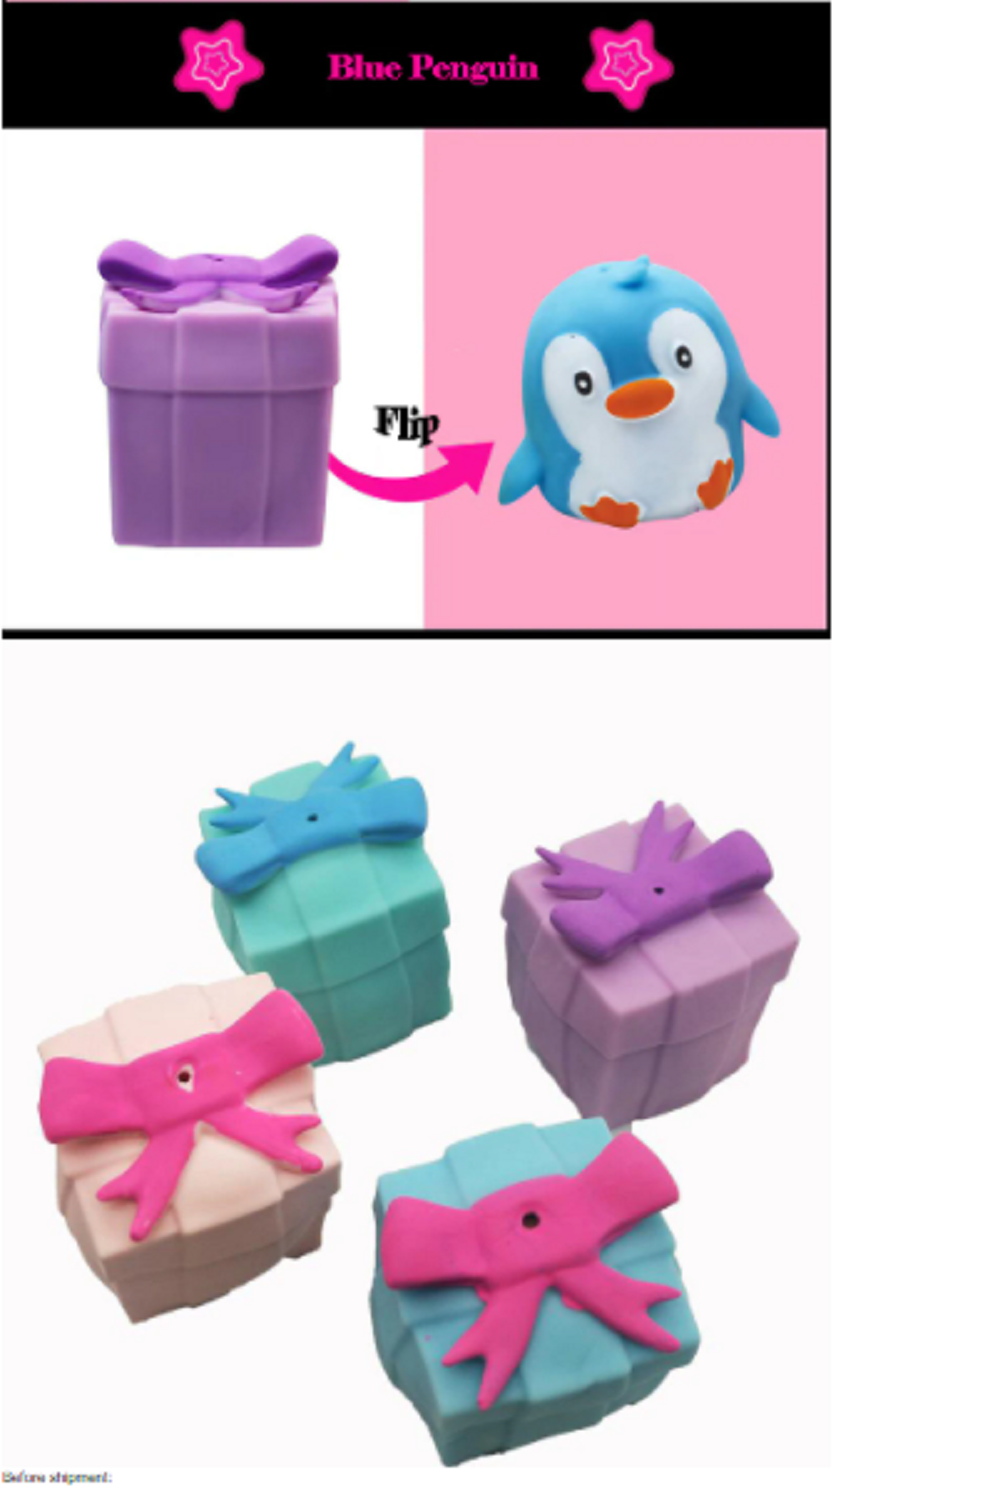 Fidget Toys Flip Gift Box Cute Pet Pinch Animal Silicone Toy Expression - One item with Random